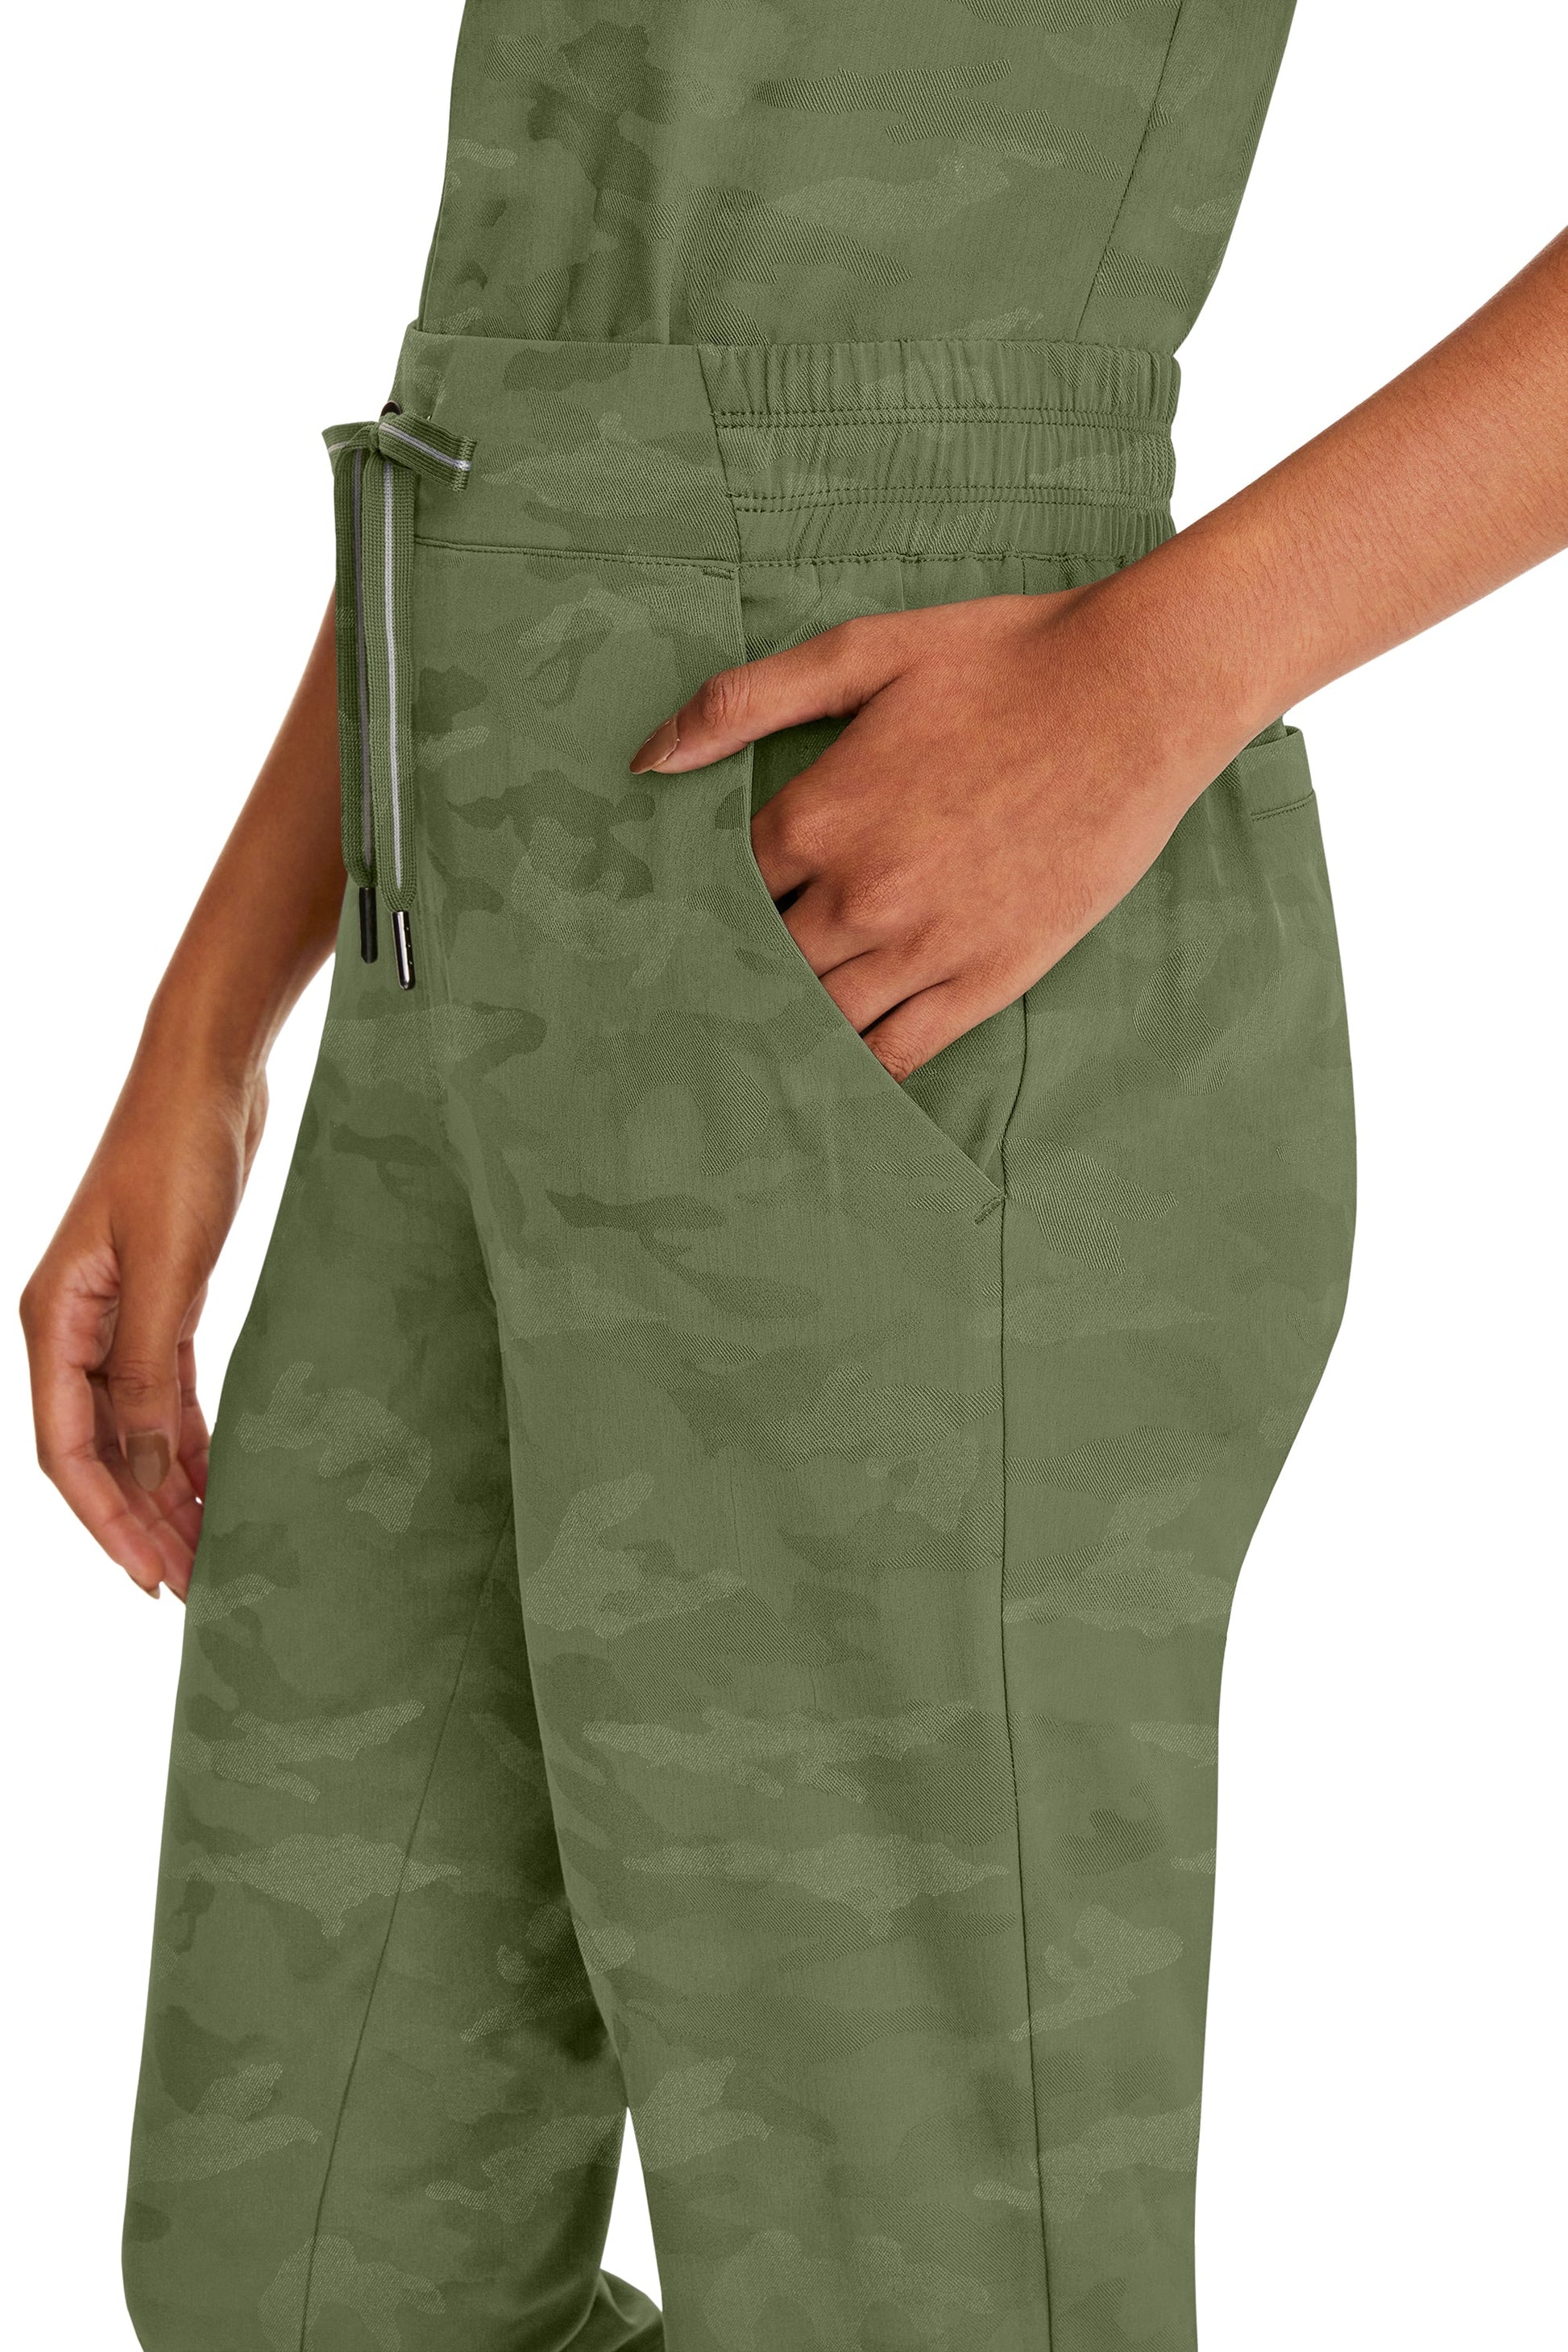 Healing Hands Purple Label Camo 9350 Women's Tate Jogger Pant Olive Side Detail